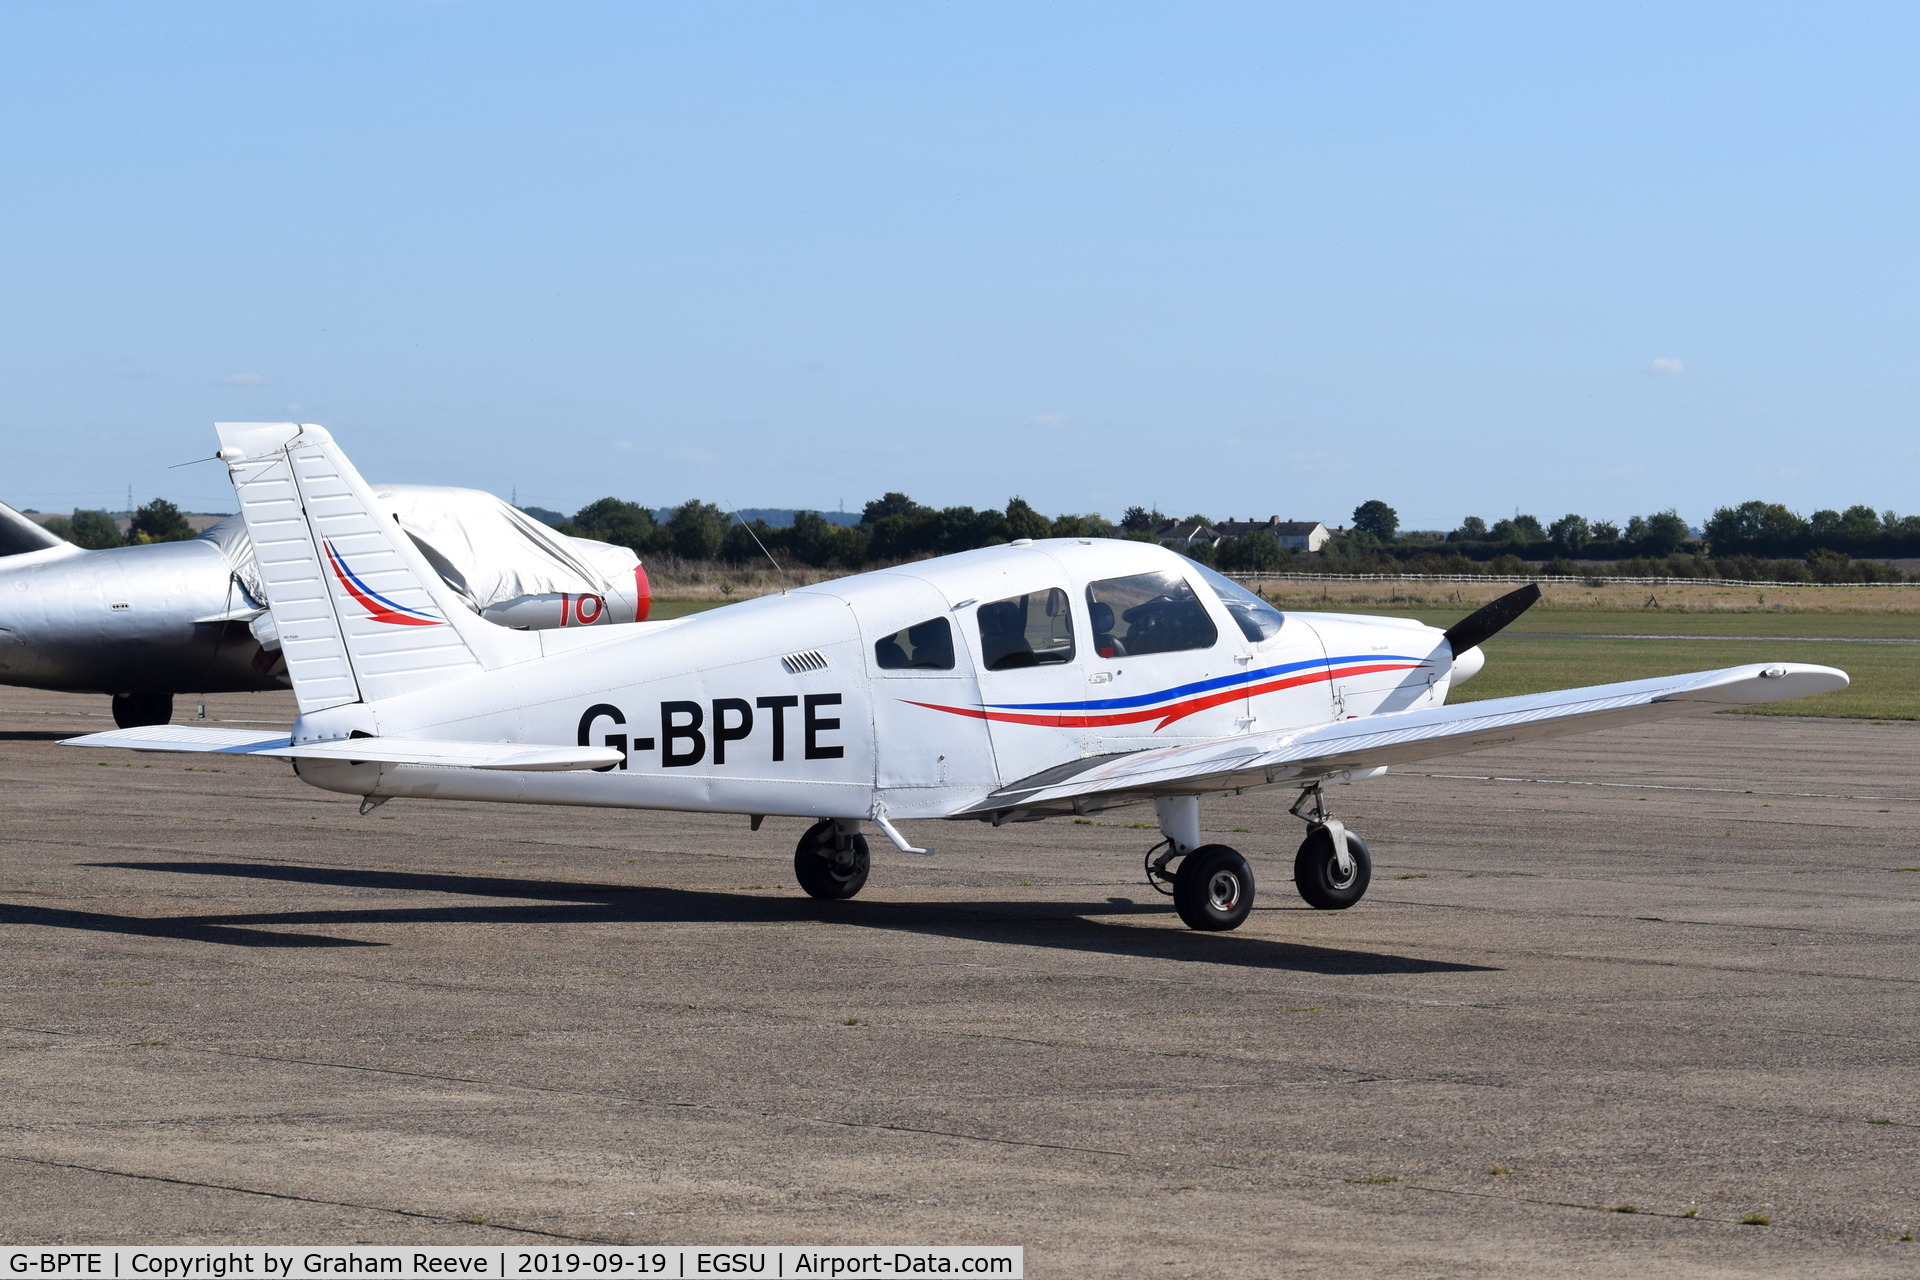 G-BPTE, 1976 Piper PA-28-181 Cherokee Archer II C/N 28-7690178, Parked at Duxford.